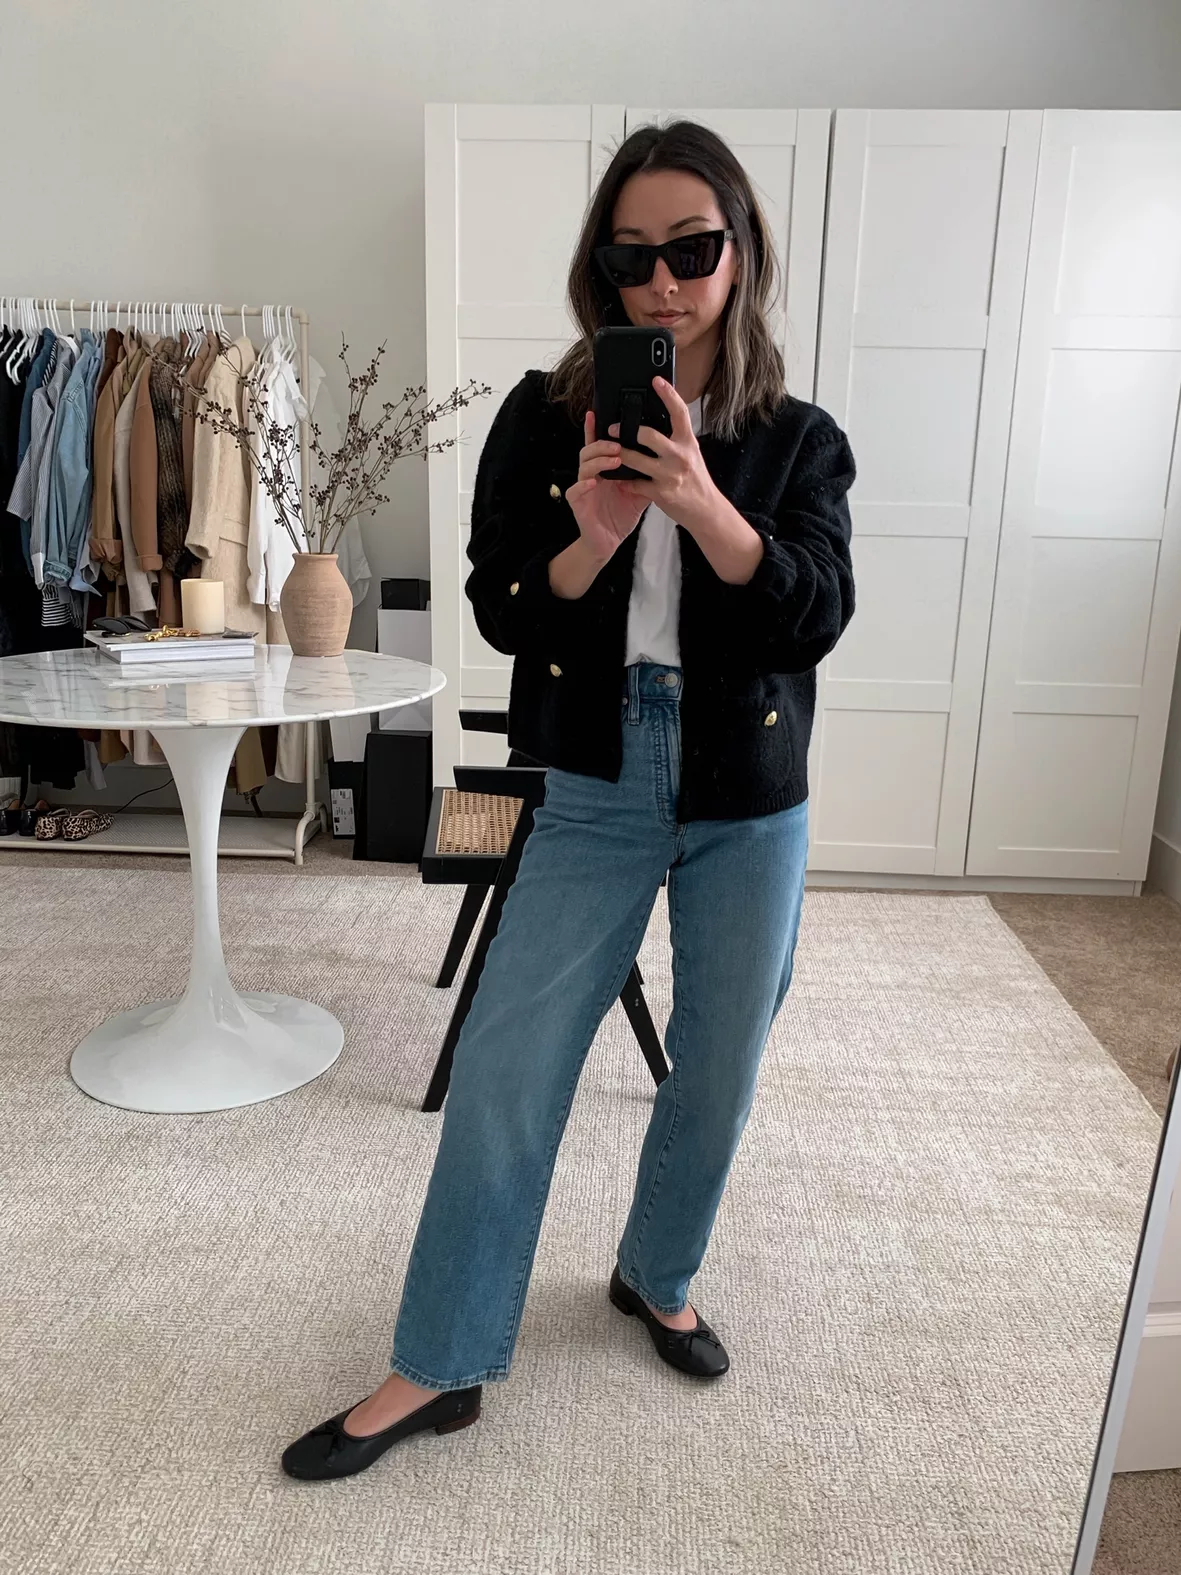 Tips to Getting Your Perfect Cropped Flare Jeans - Crystalin Marie  Cropped  flare jeans, Flare denim outfit, Flare jeans outfit winter